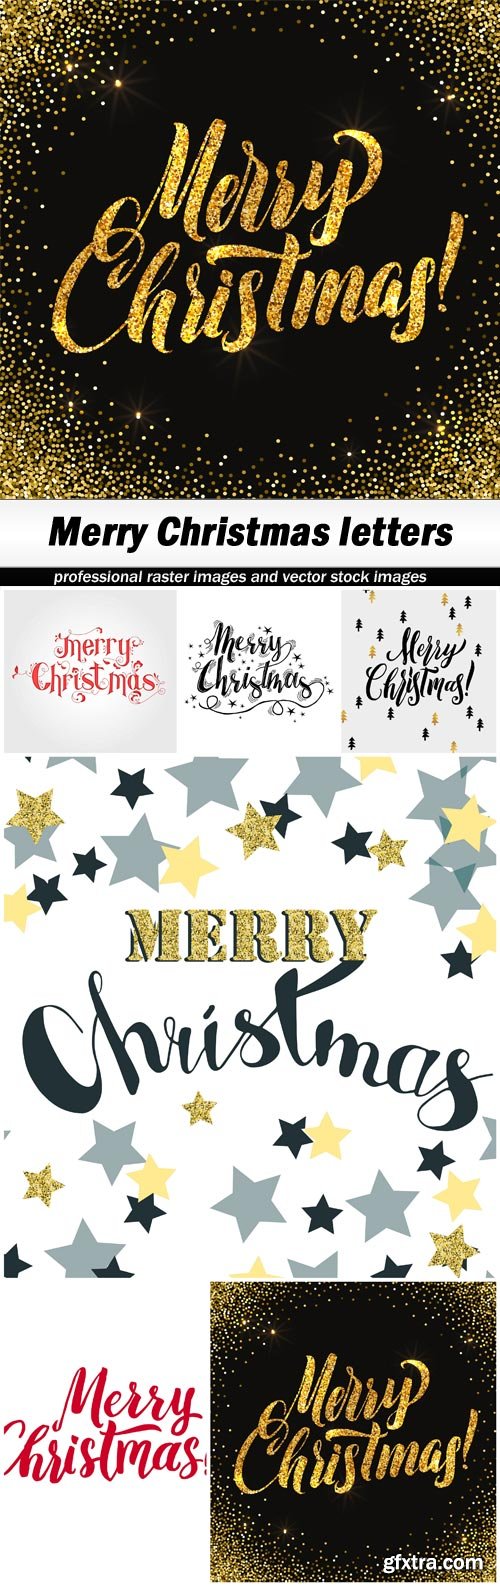 Merry Christmas letters - 6 EPS